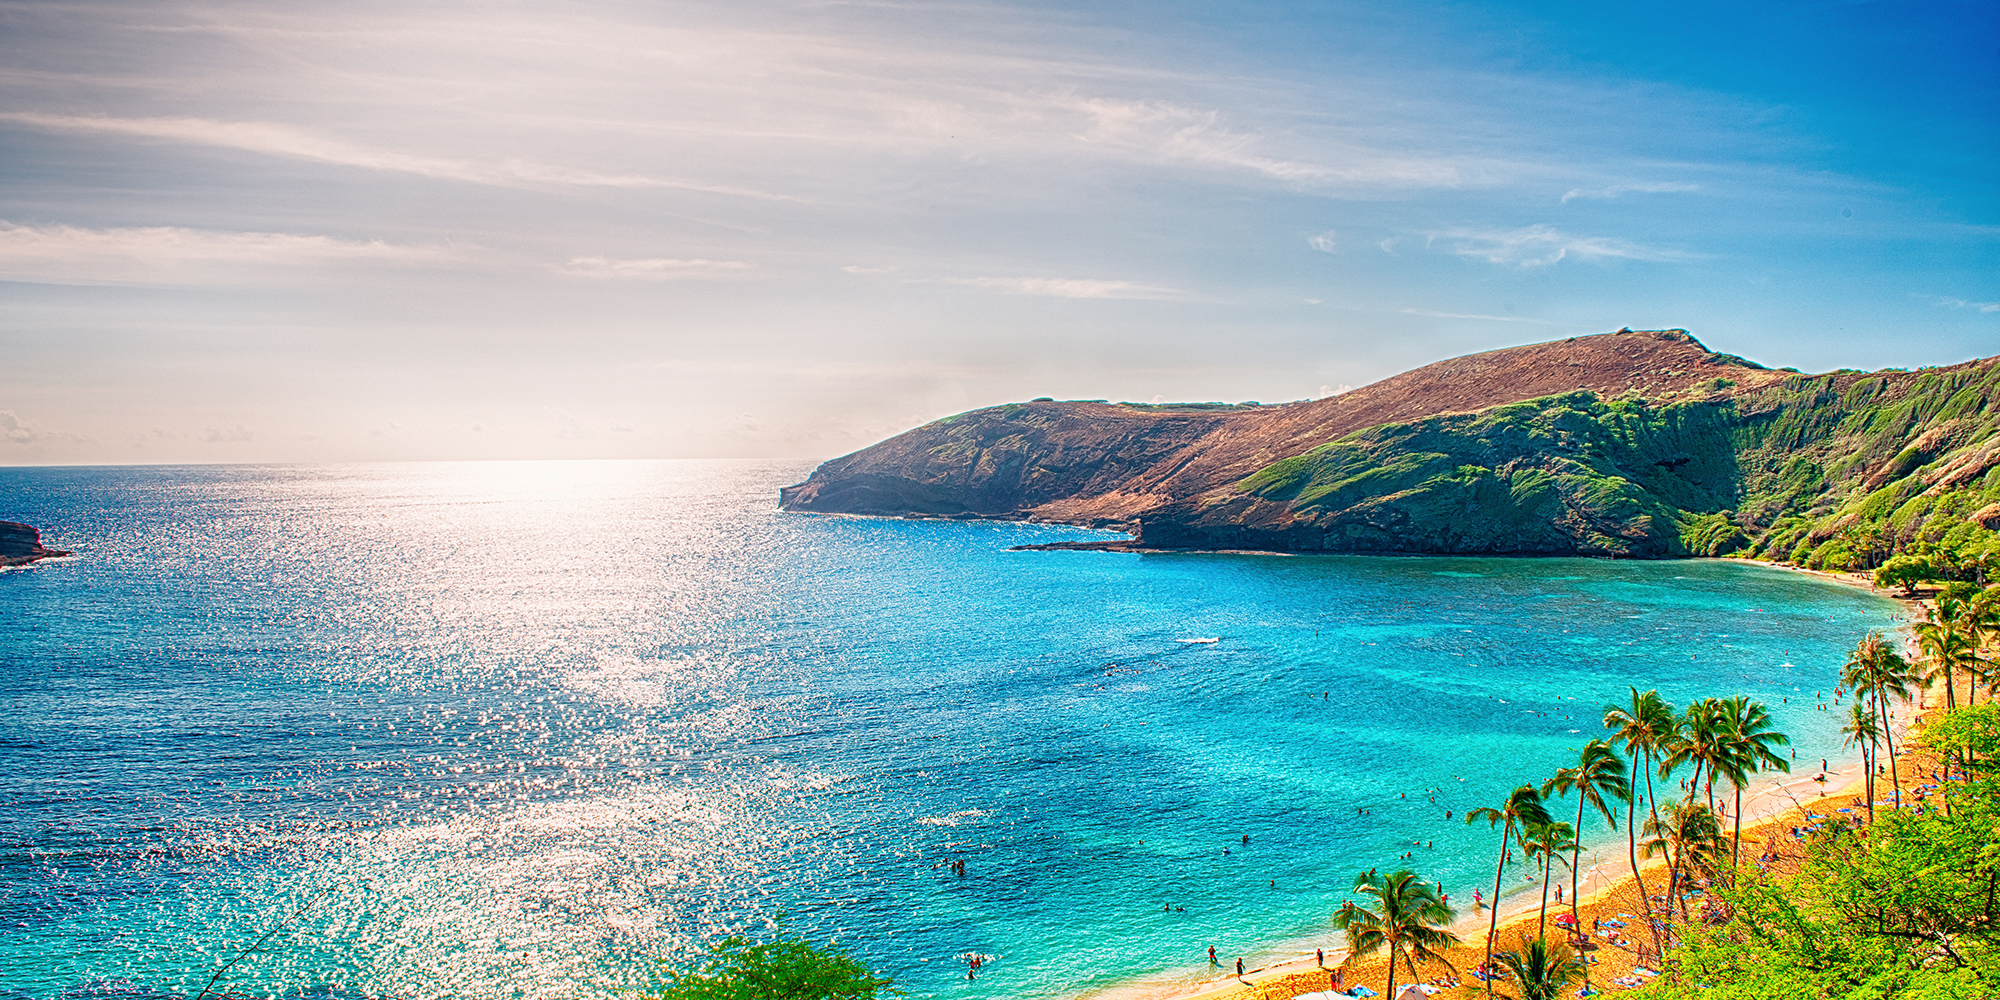 Top 10 Most Scenic Spots in Hawaii